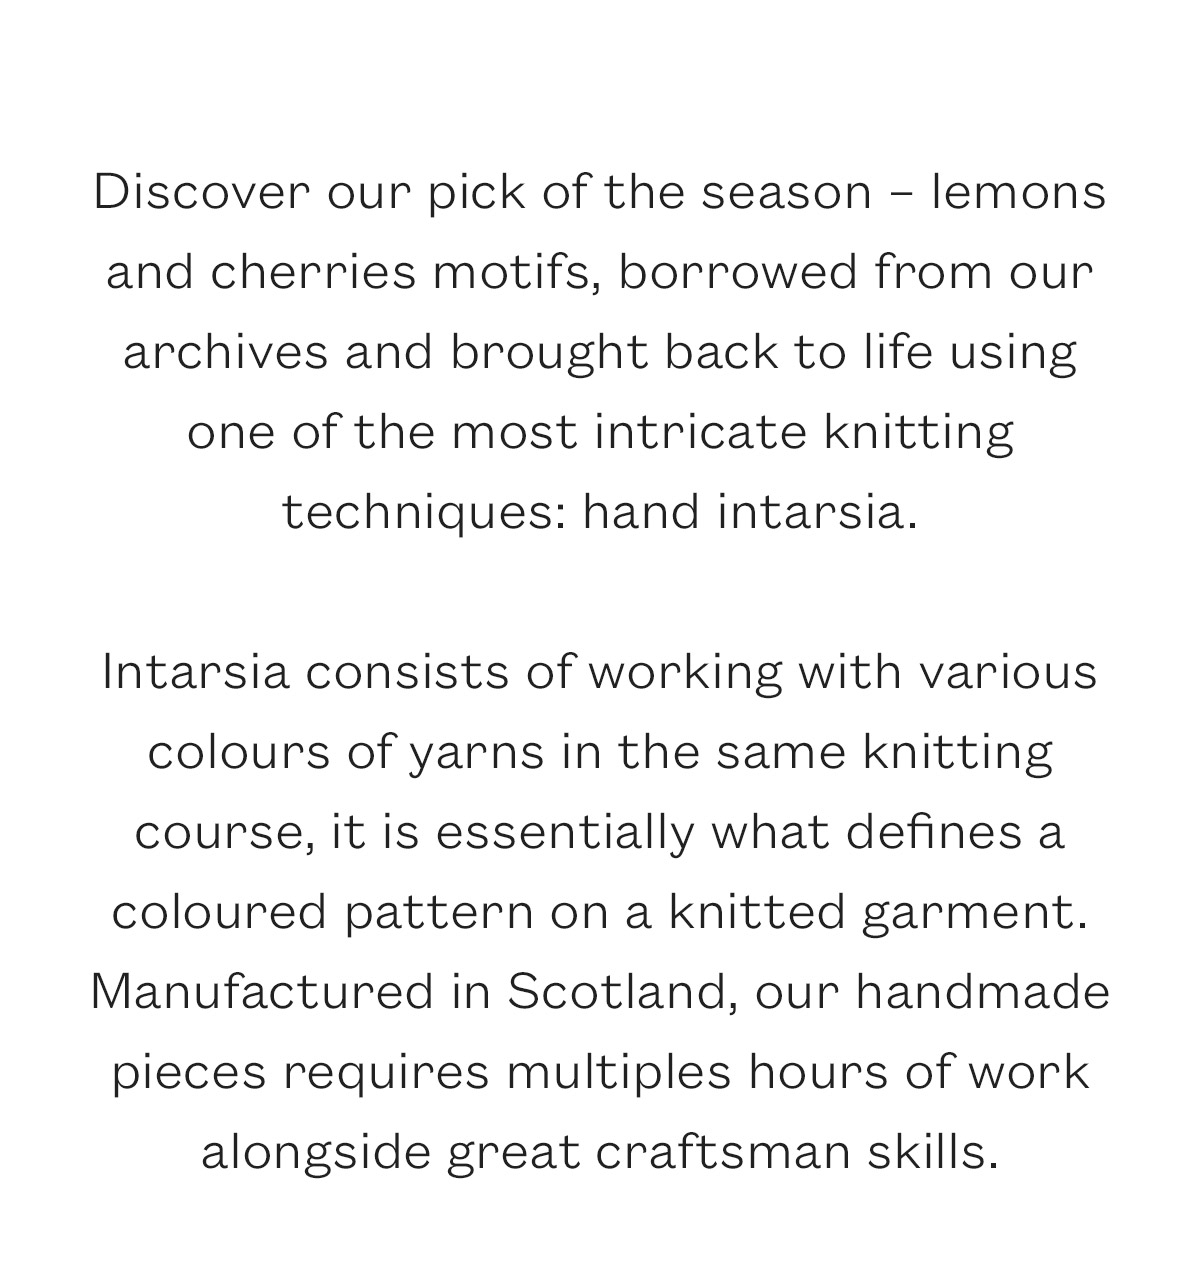 Discover our pick of the season - lemons and cherries motifs, borrowed from our archives and brought back to life using one of the most intricate knitting techniques: hand intarsia.   Intarsia consists of working with various colours of yarns in the same knitting course, it is essentially what defines a coloured pattern on a knitted garment. Manufactured in Scotland, our handmade pieces requires multiples hours of work alongside great craftsman skills. 